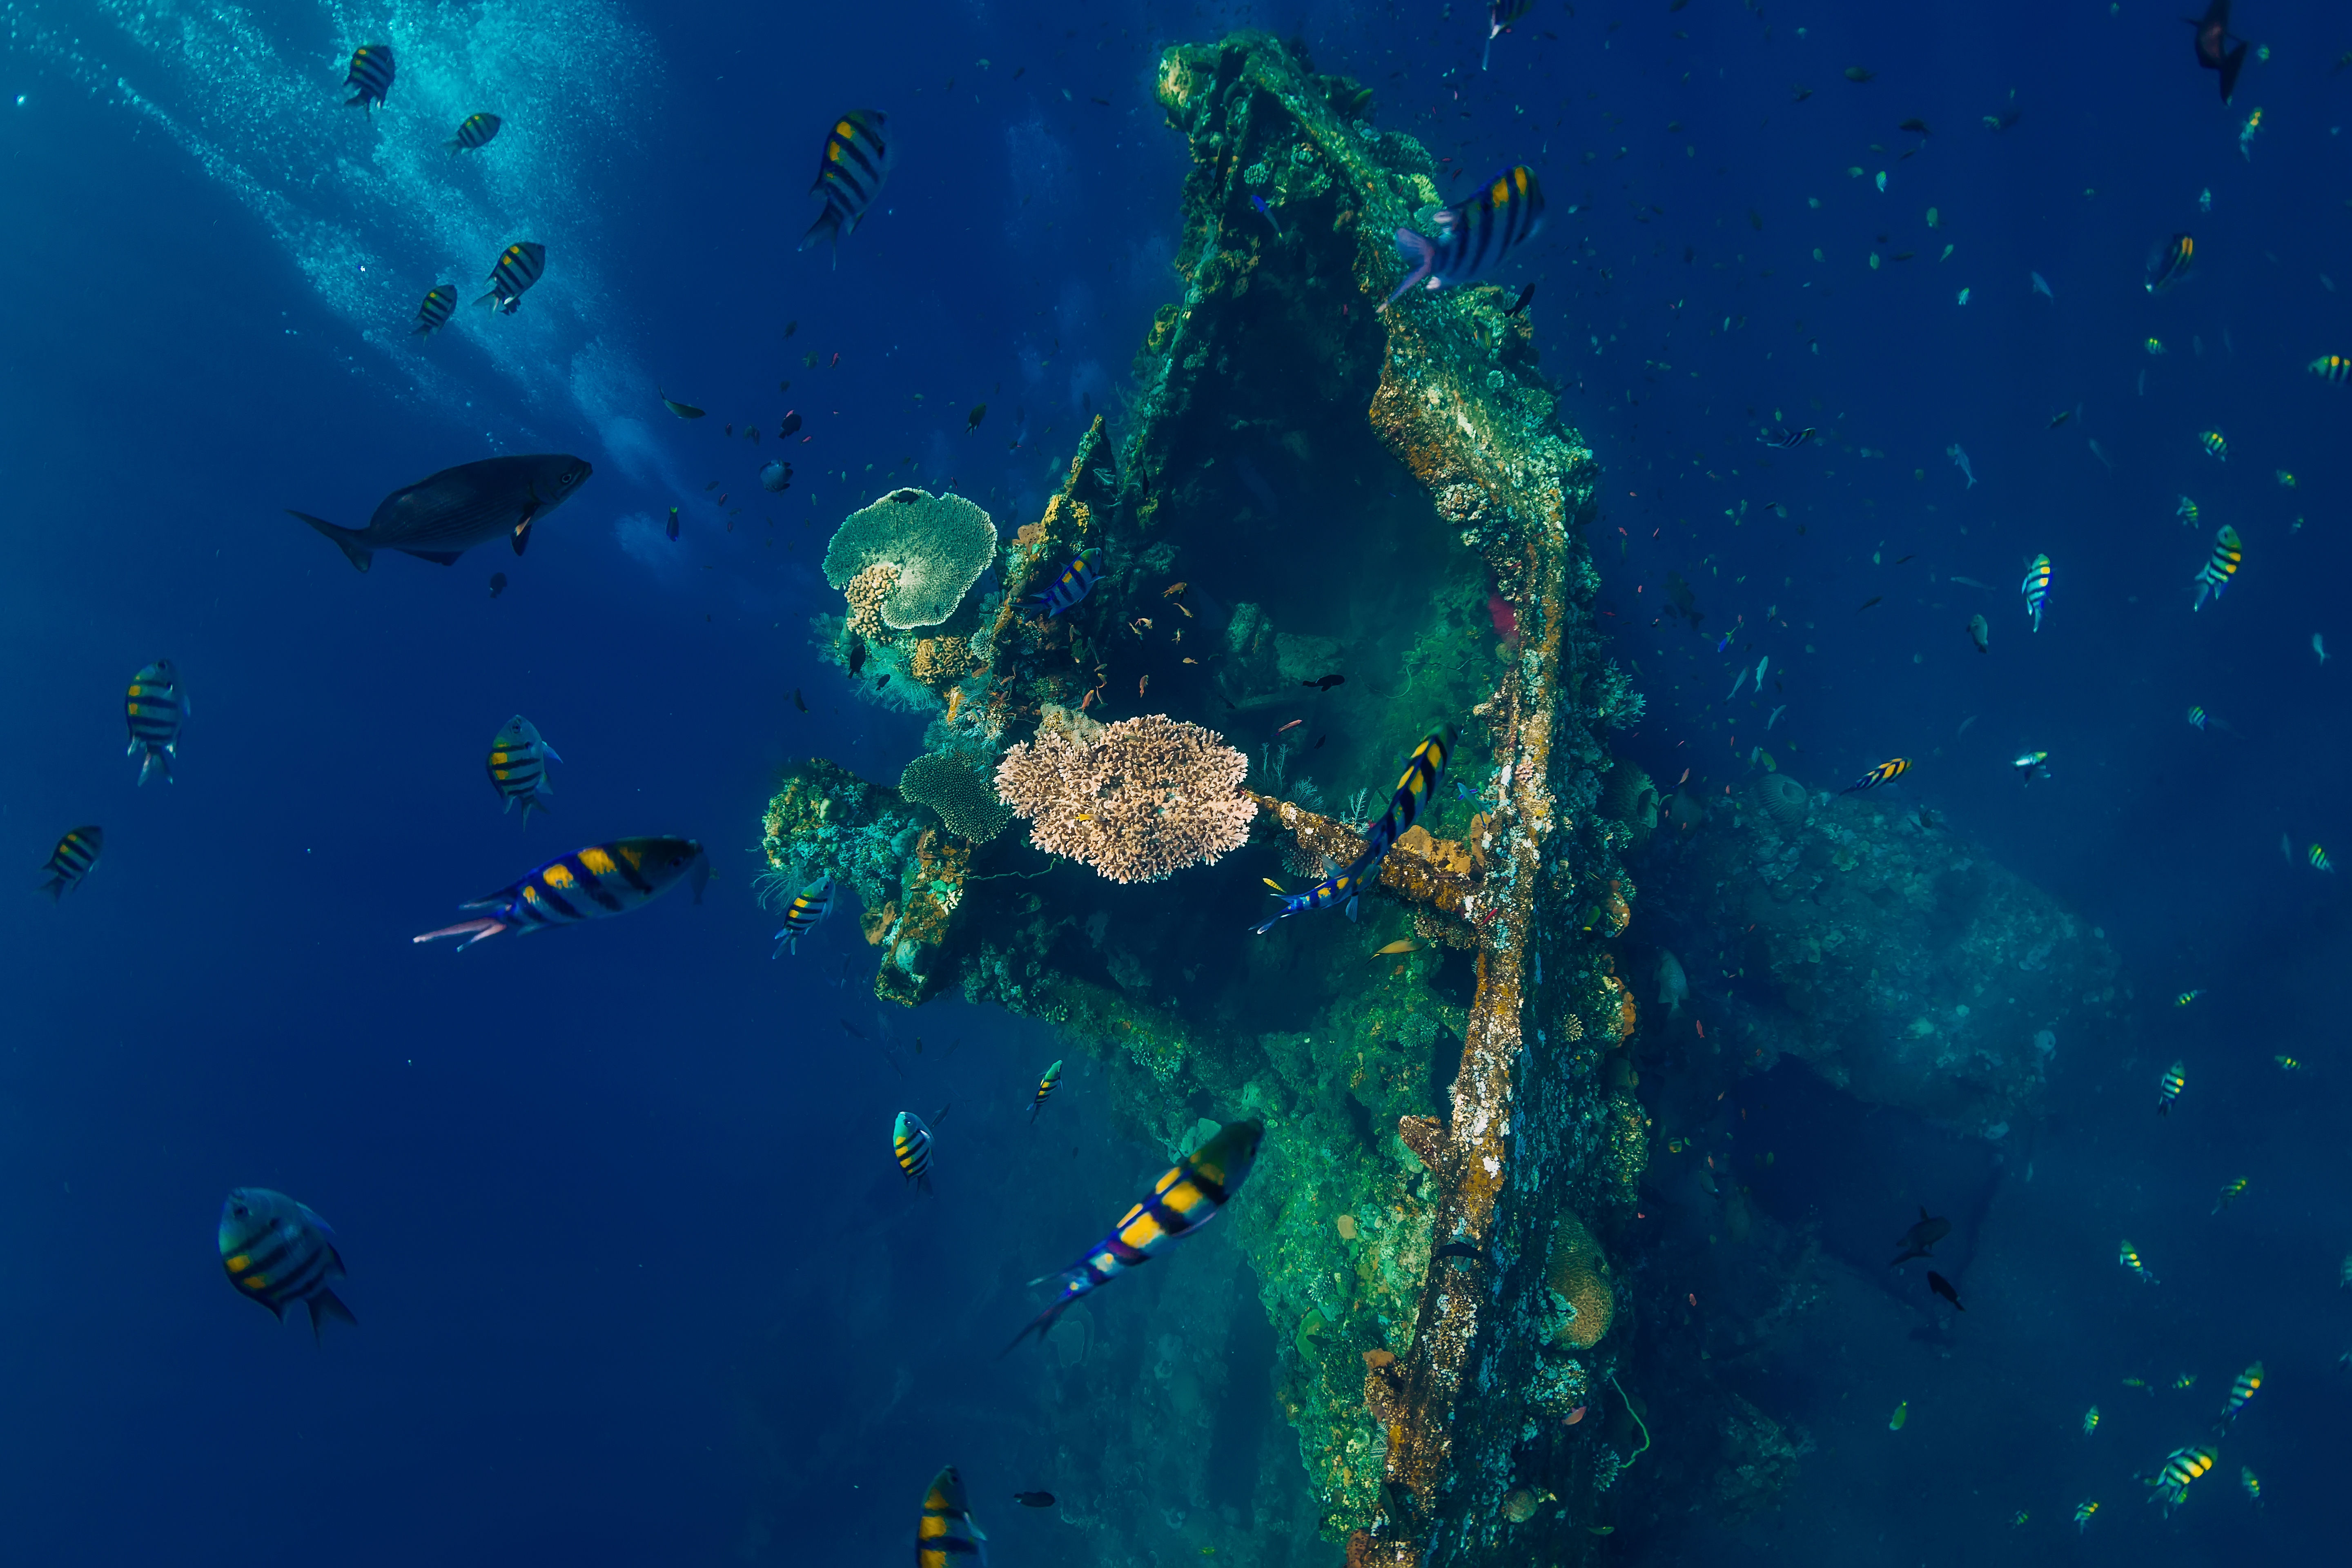 Underwater photo of the USAT Liberty wreck in deep blue water, corals, fish and divers bubbles, lying off the coast of Tulamben in Bali.